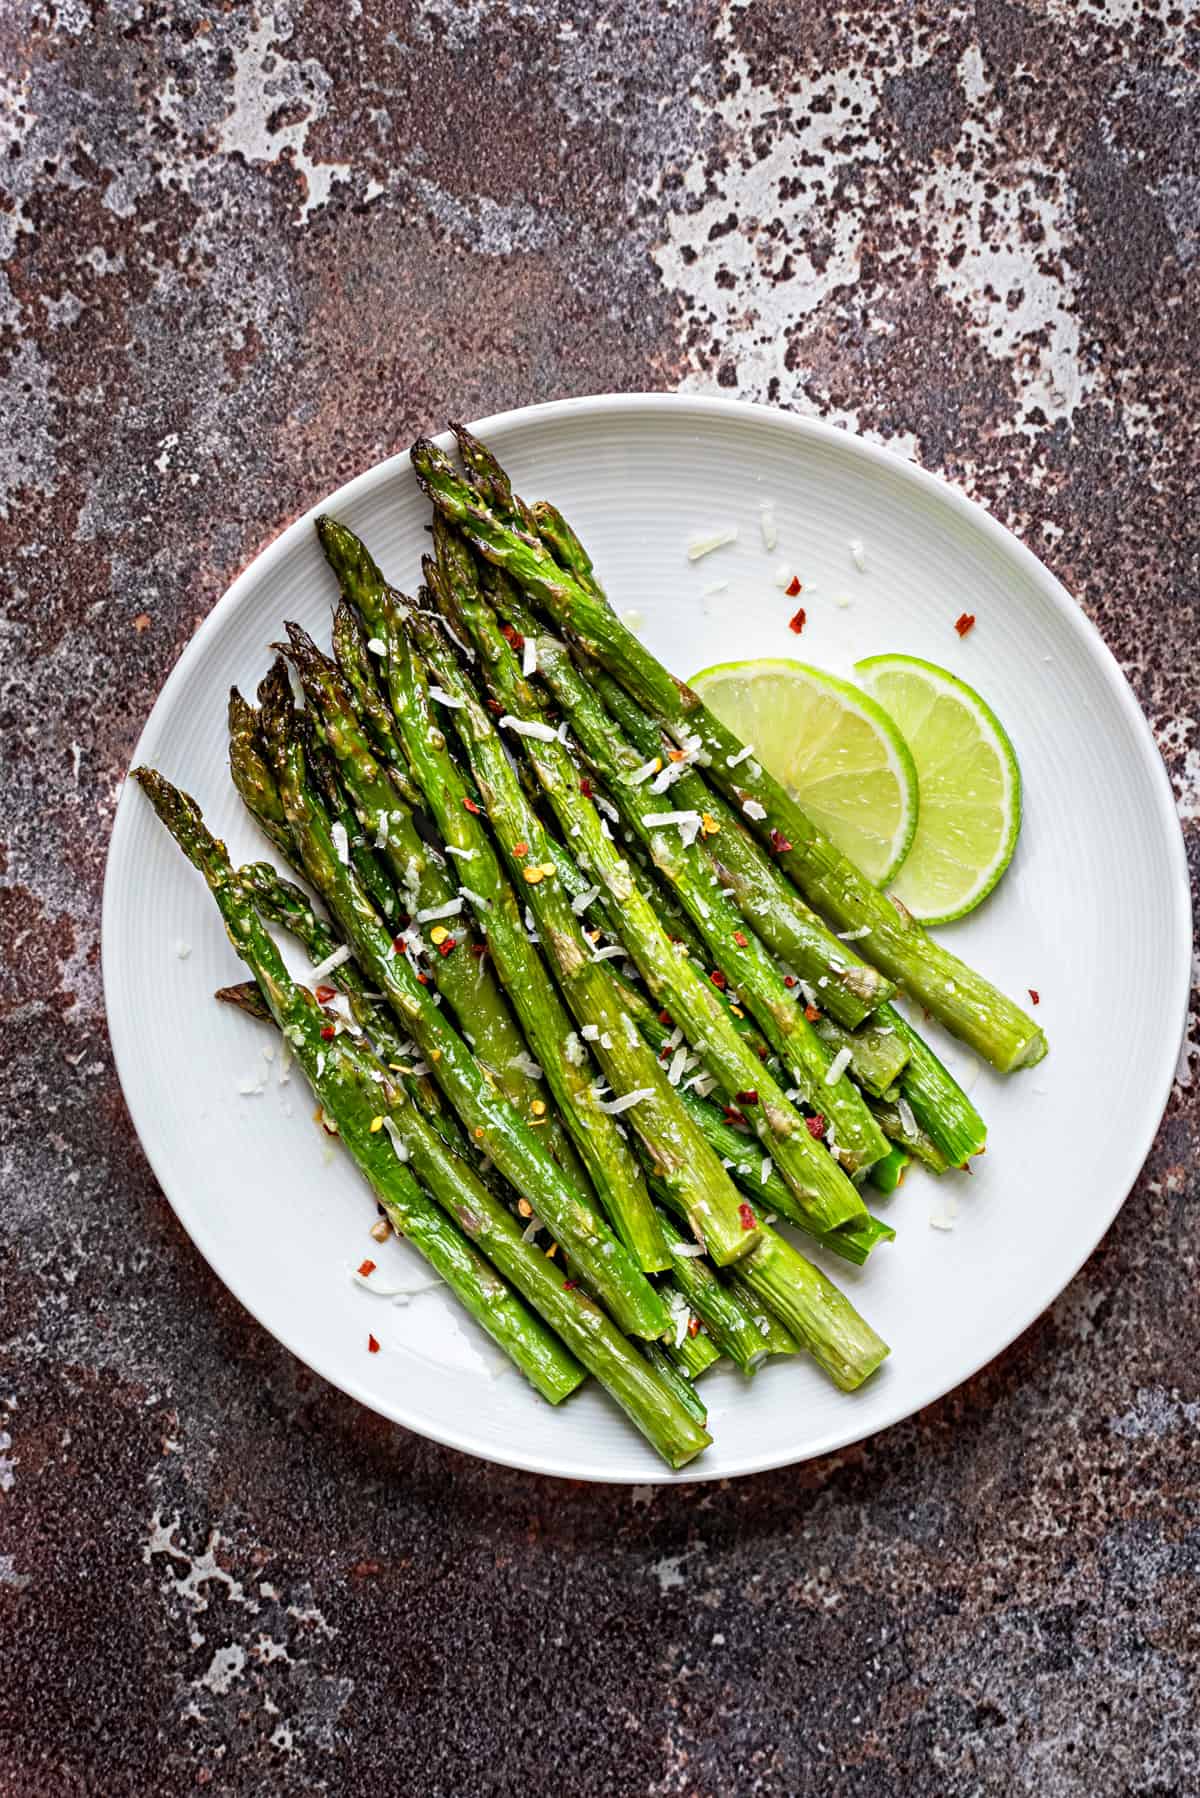 Oven roasted asparagus placed on a white plate and topped with grated parmesan, and chili flakes.